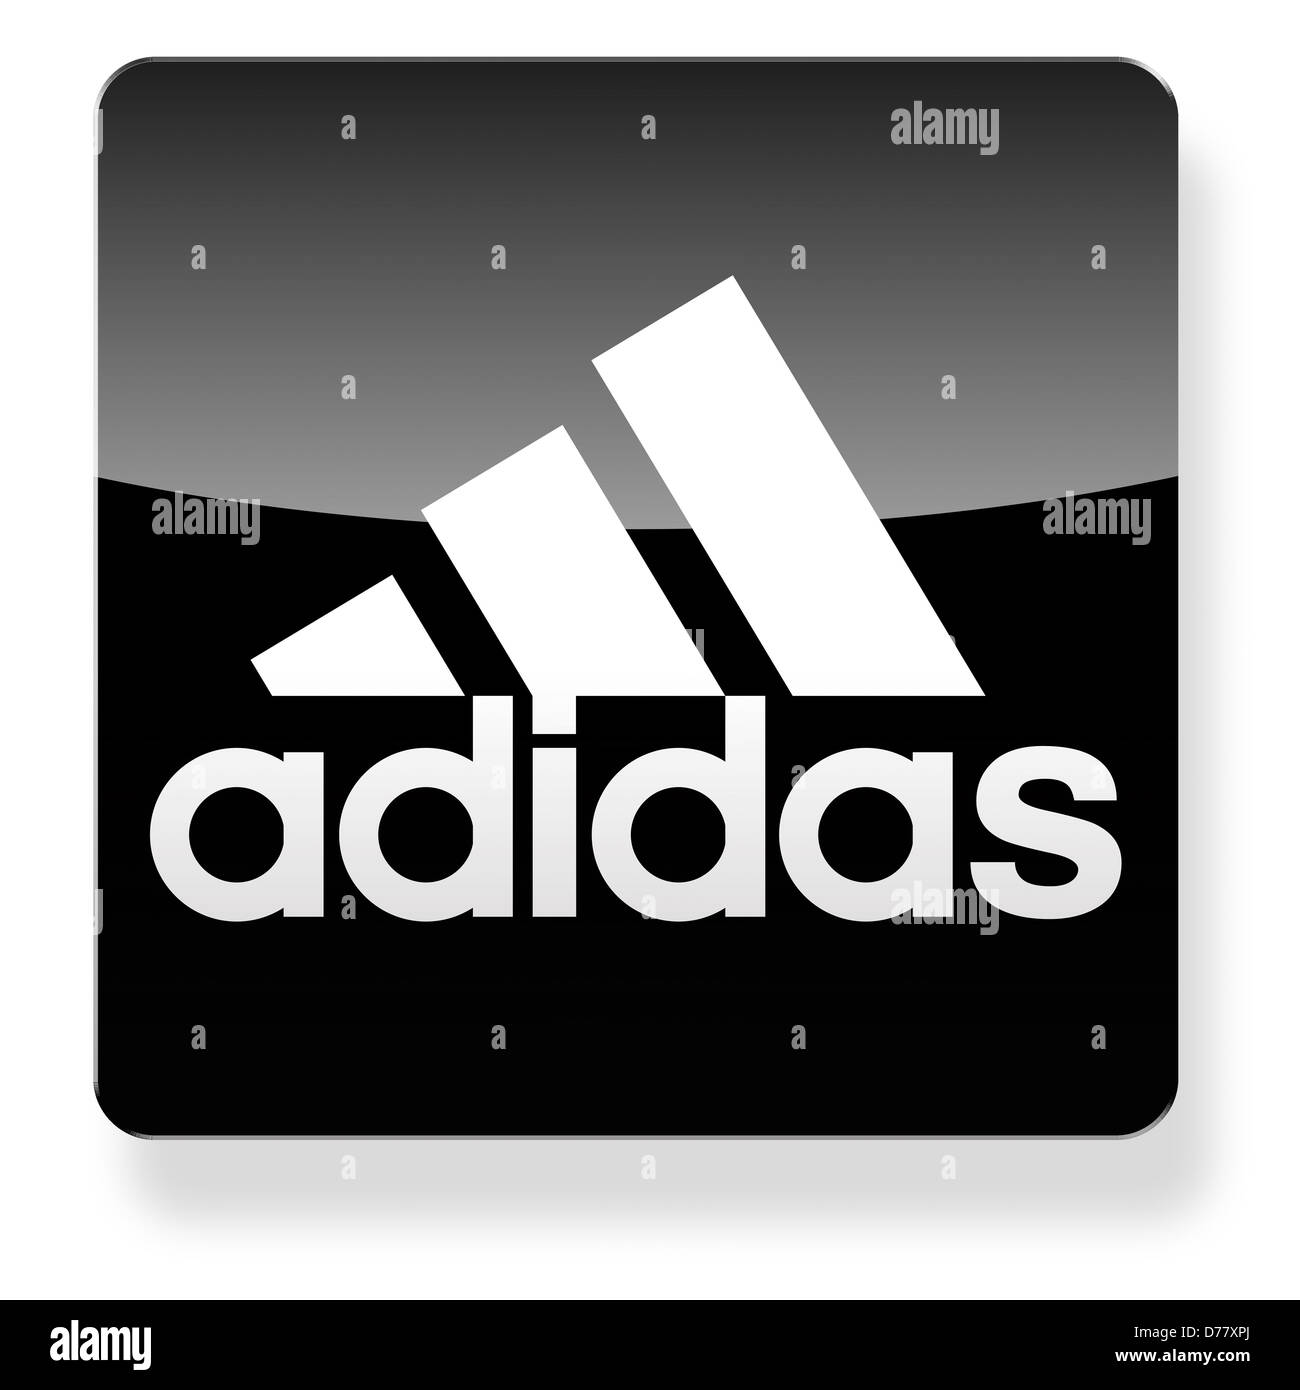 Adidas logo as an app icon. Clipping path included. Stock Photo